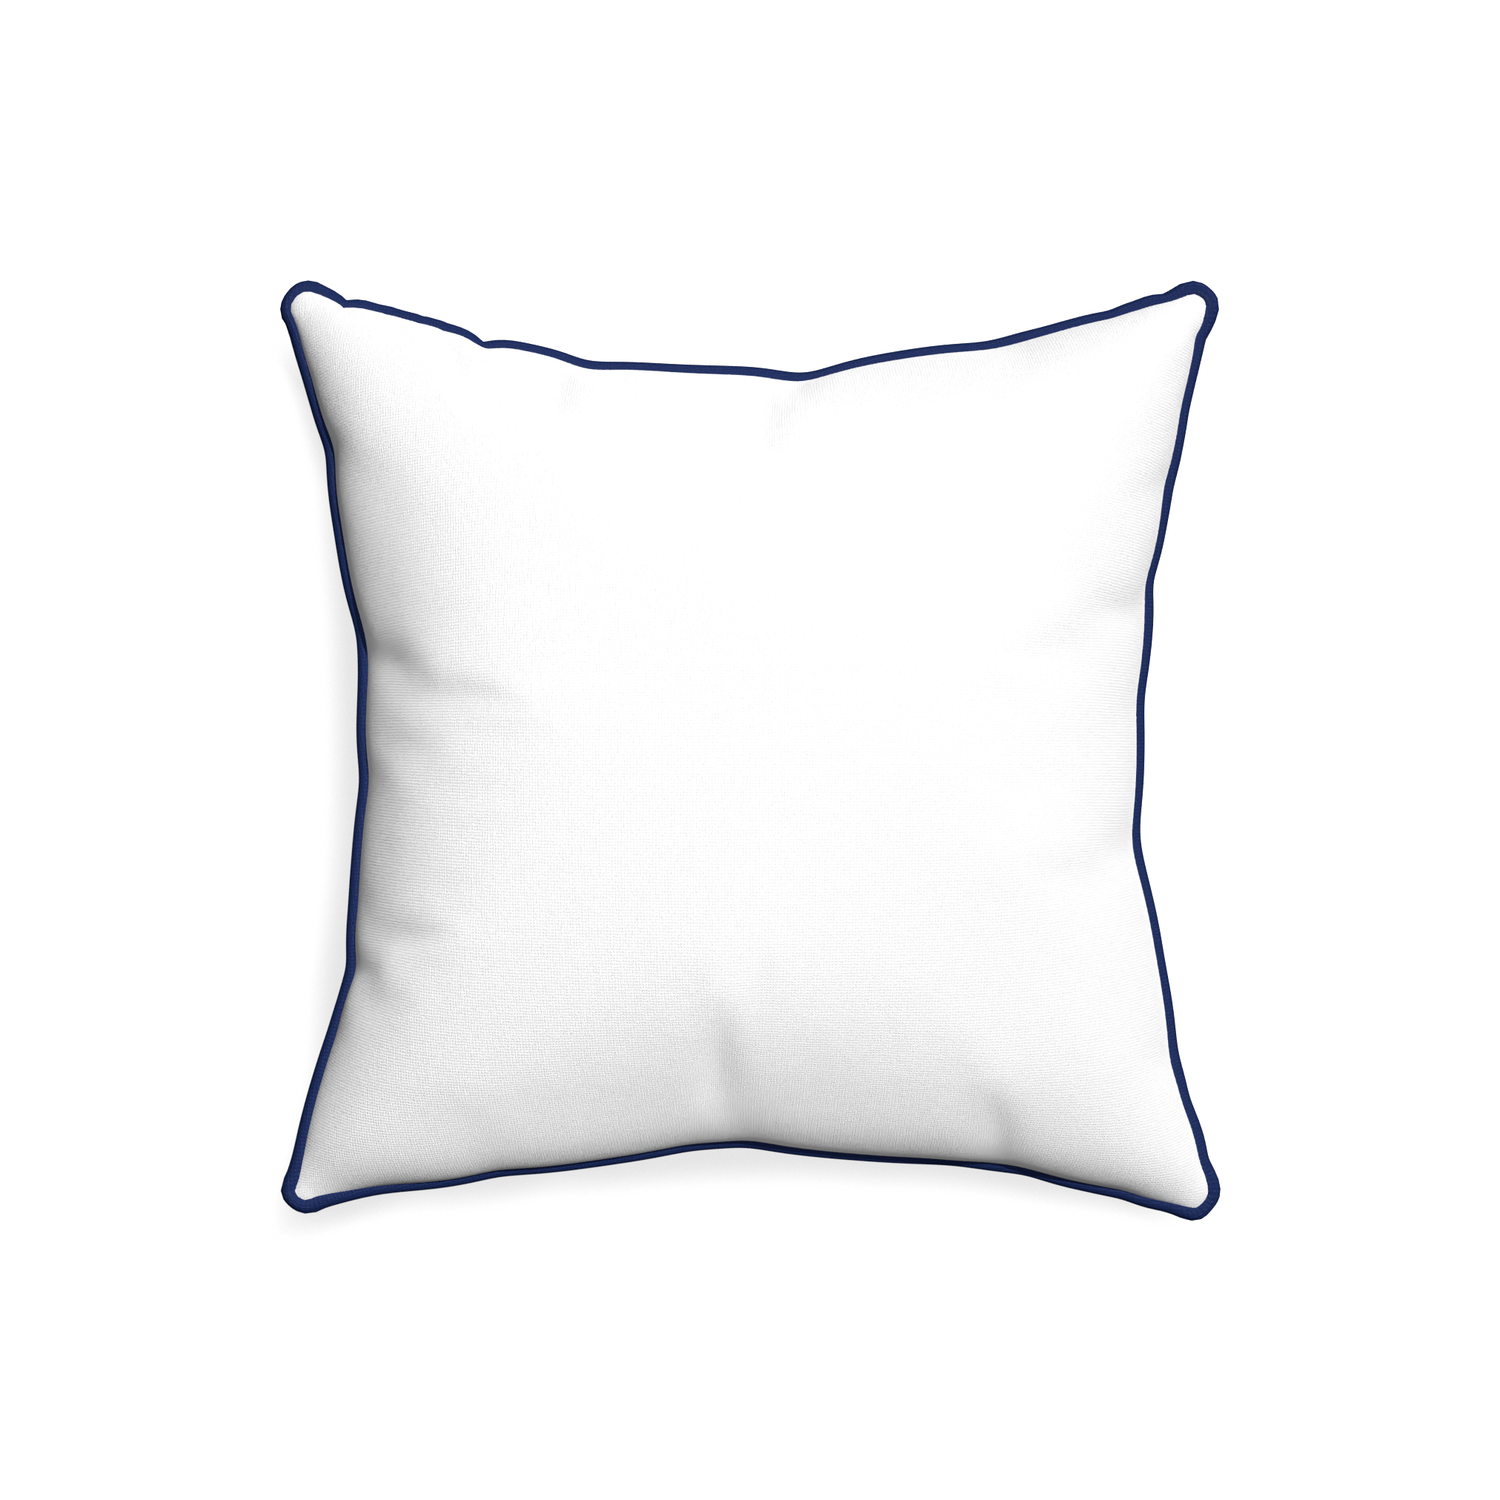 20-square snow custom white cottonpillow with midnight piping on white background